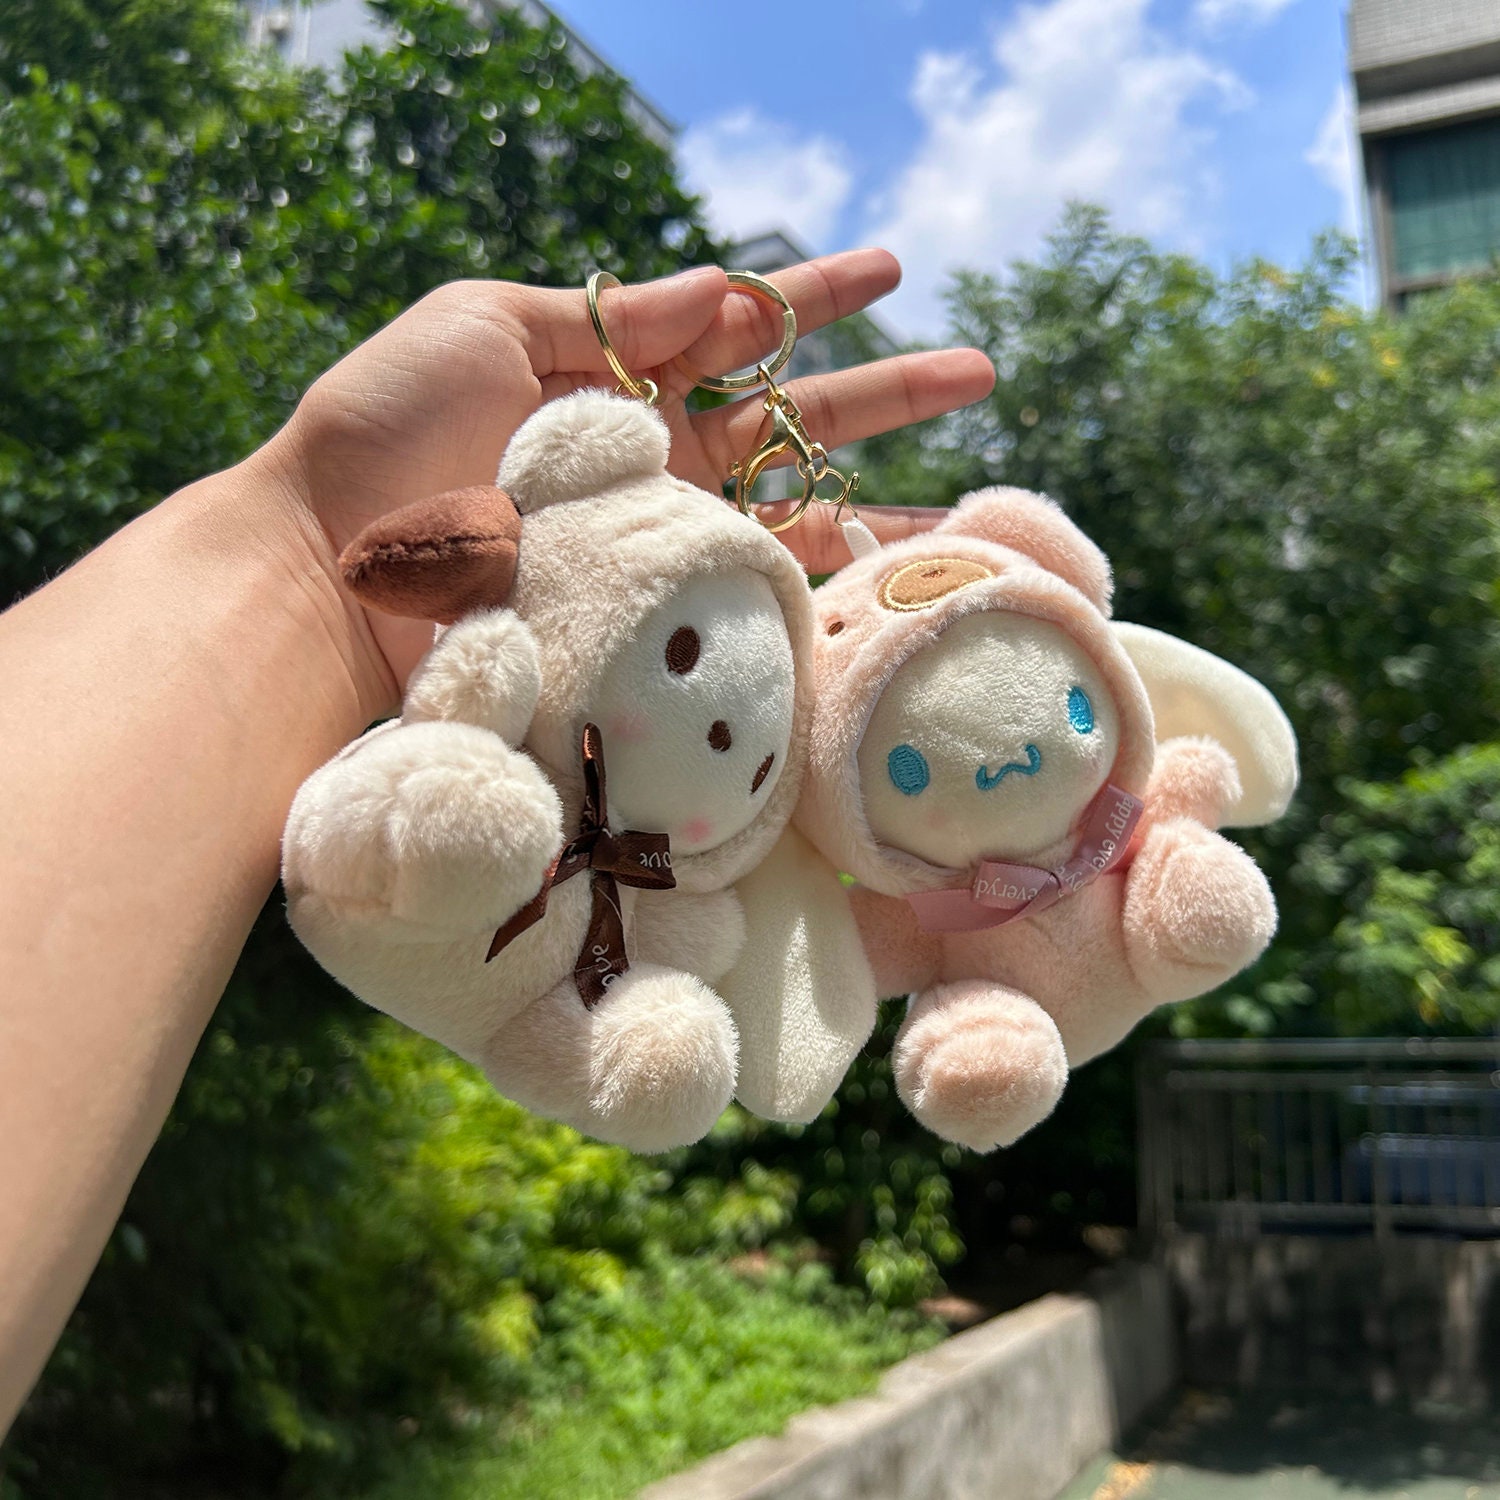 KESYOO 3 Pcs Mini Joint Teddy Bear Keychains Stuffed Animal Plush Toys  Animals Keychain Doll Bag Charm for Wedding Party Favors Decoration White  Brown